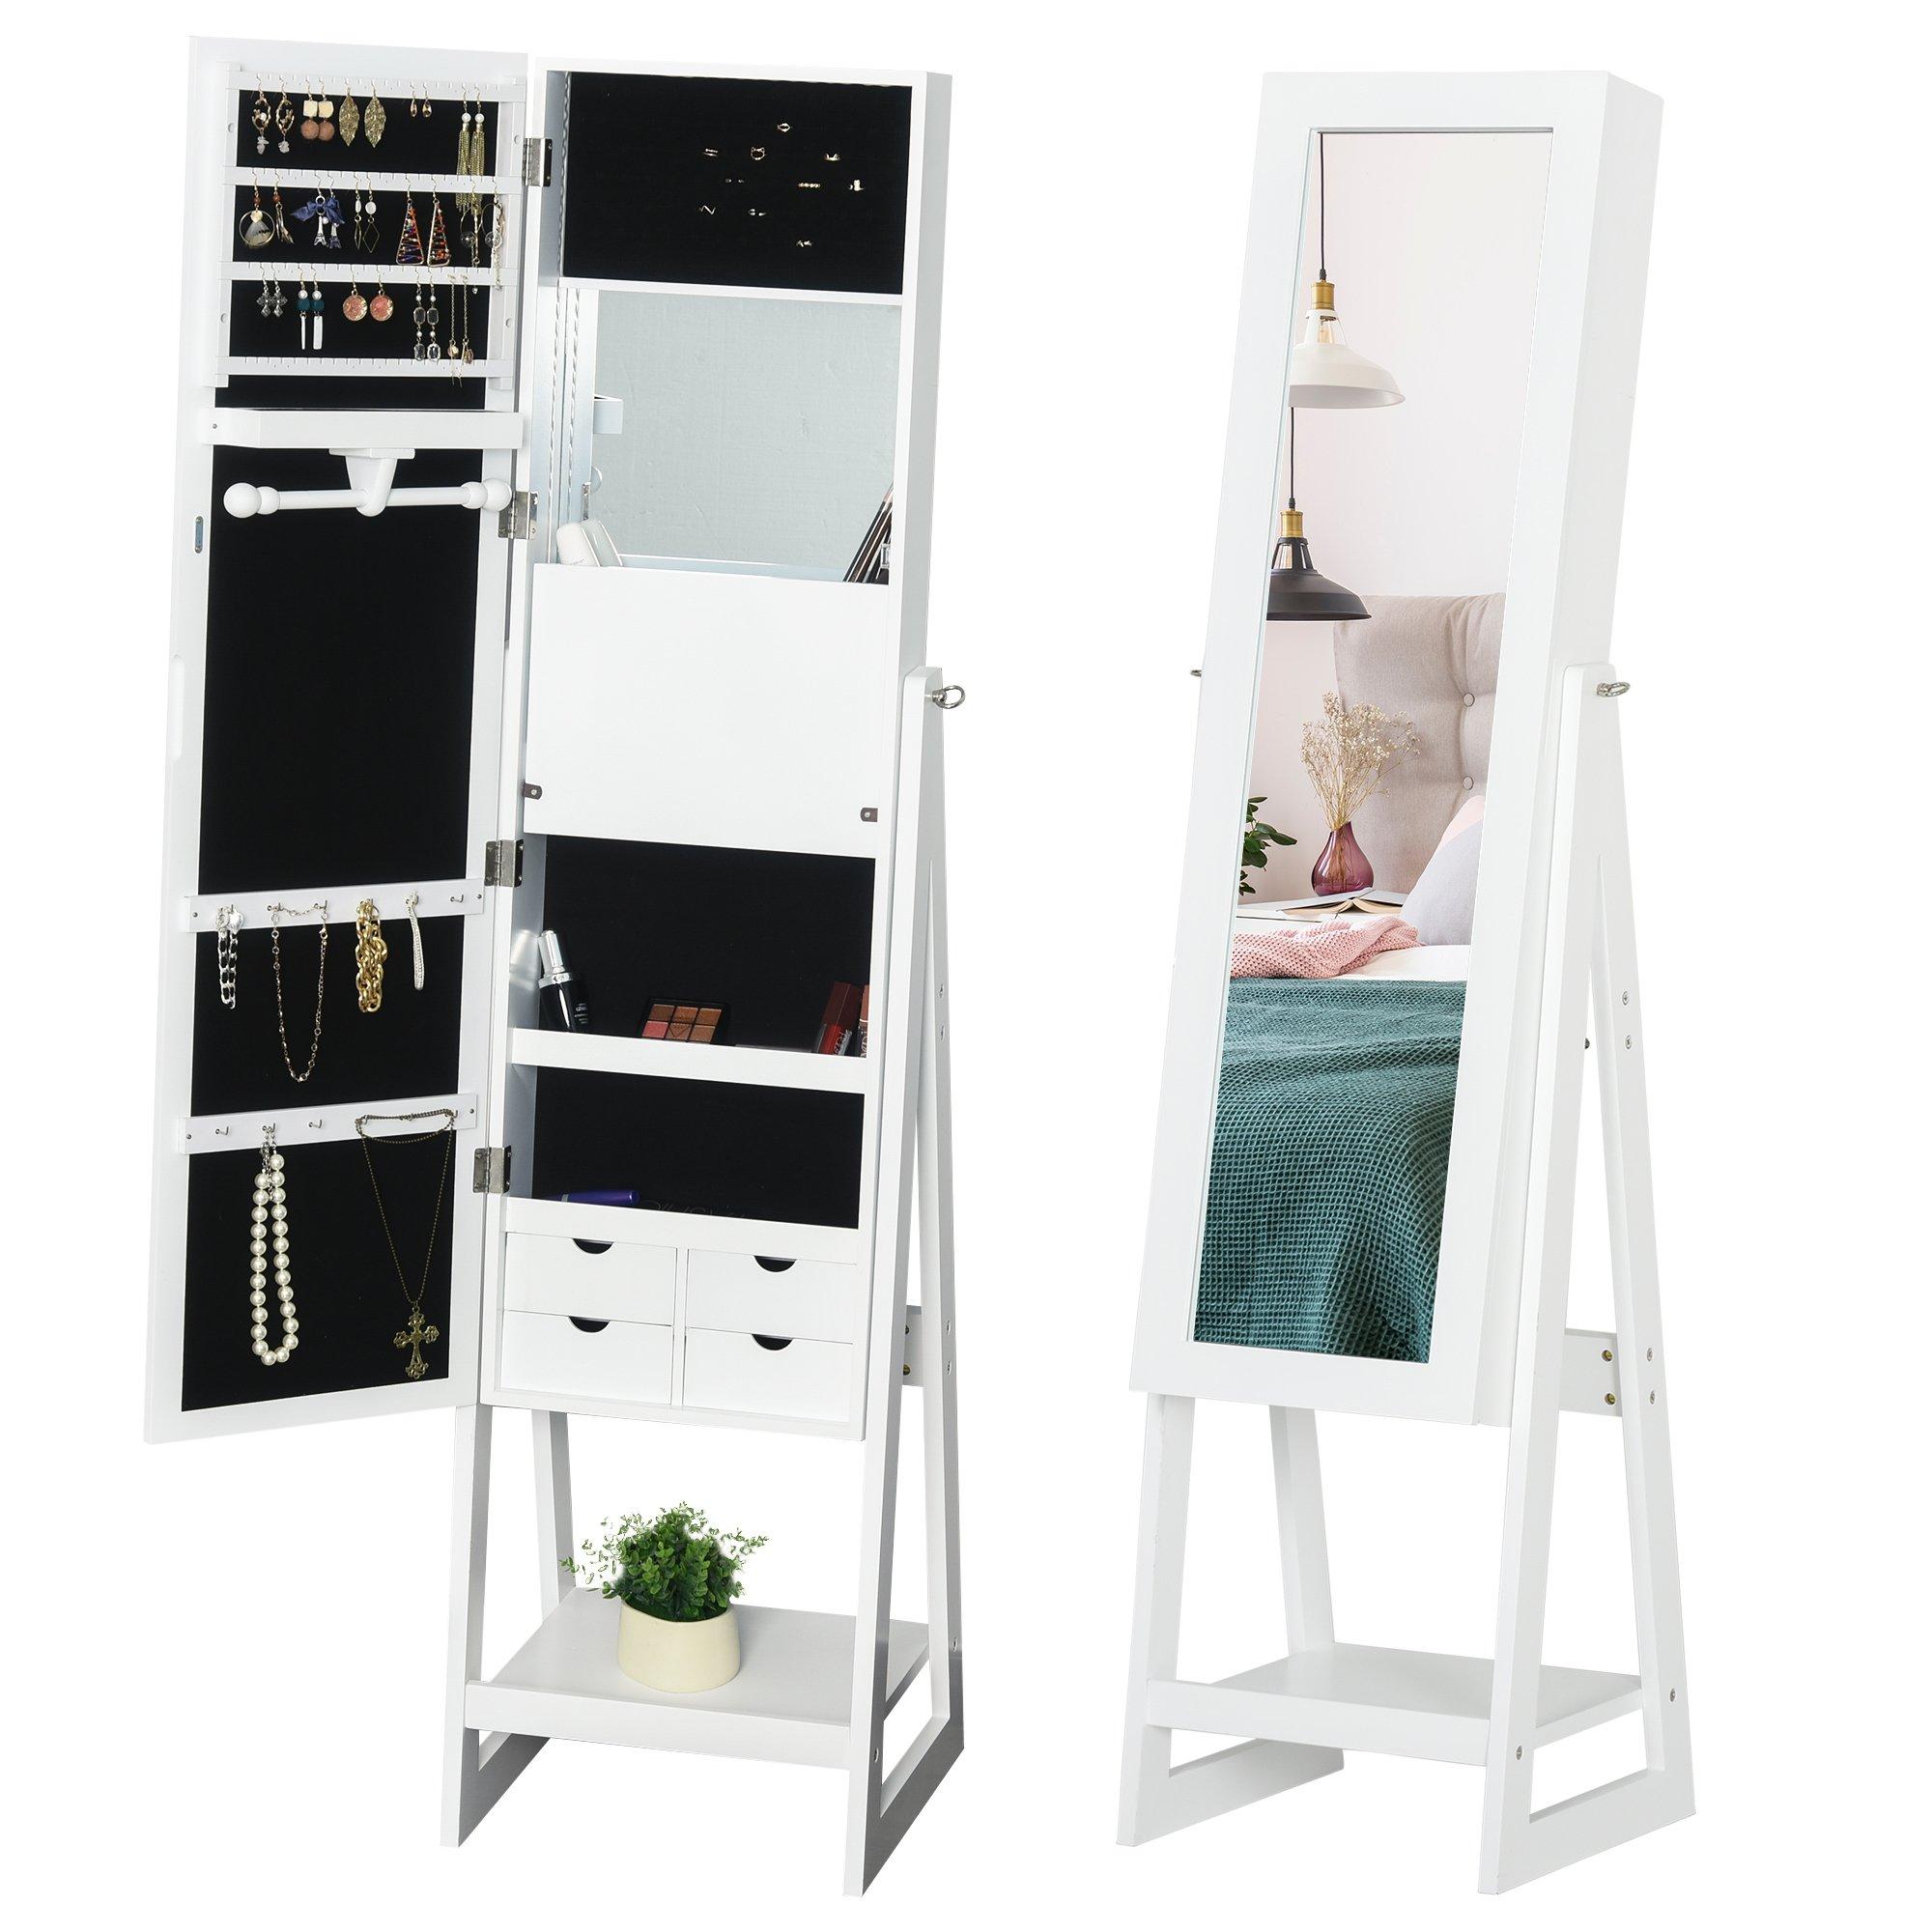 LED Light Jewelry Cabinet Storage Armoire 2 Mirrors Drawers